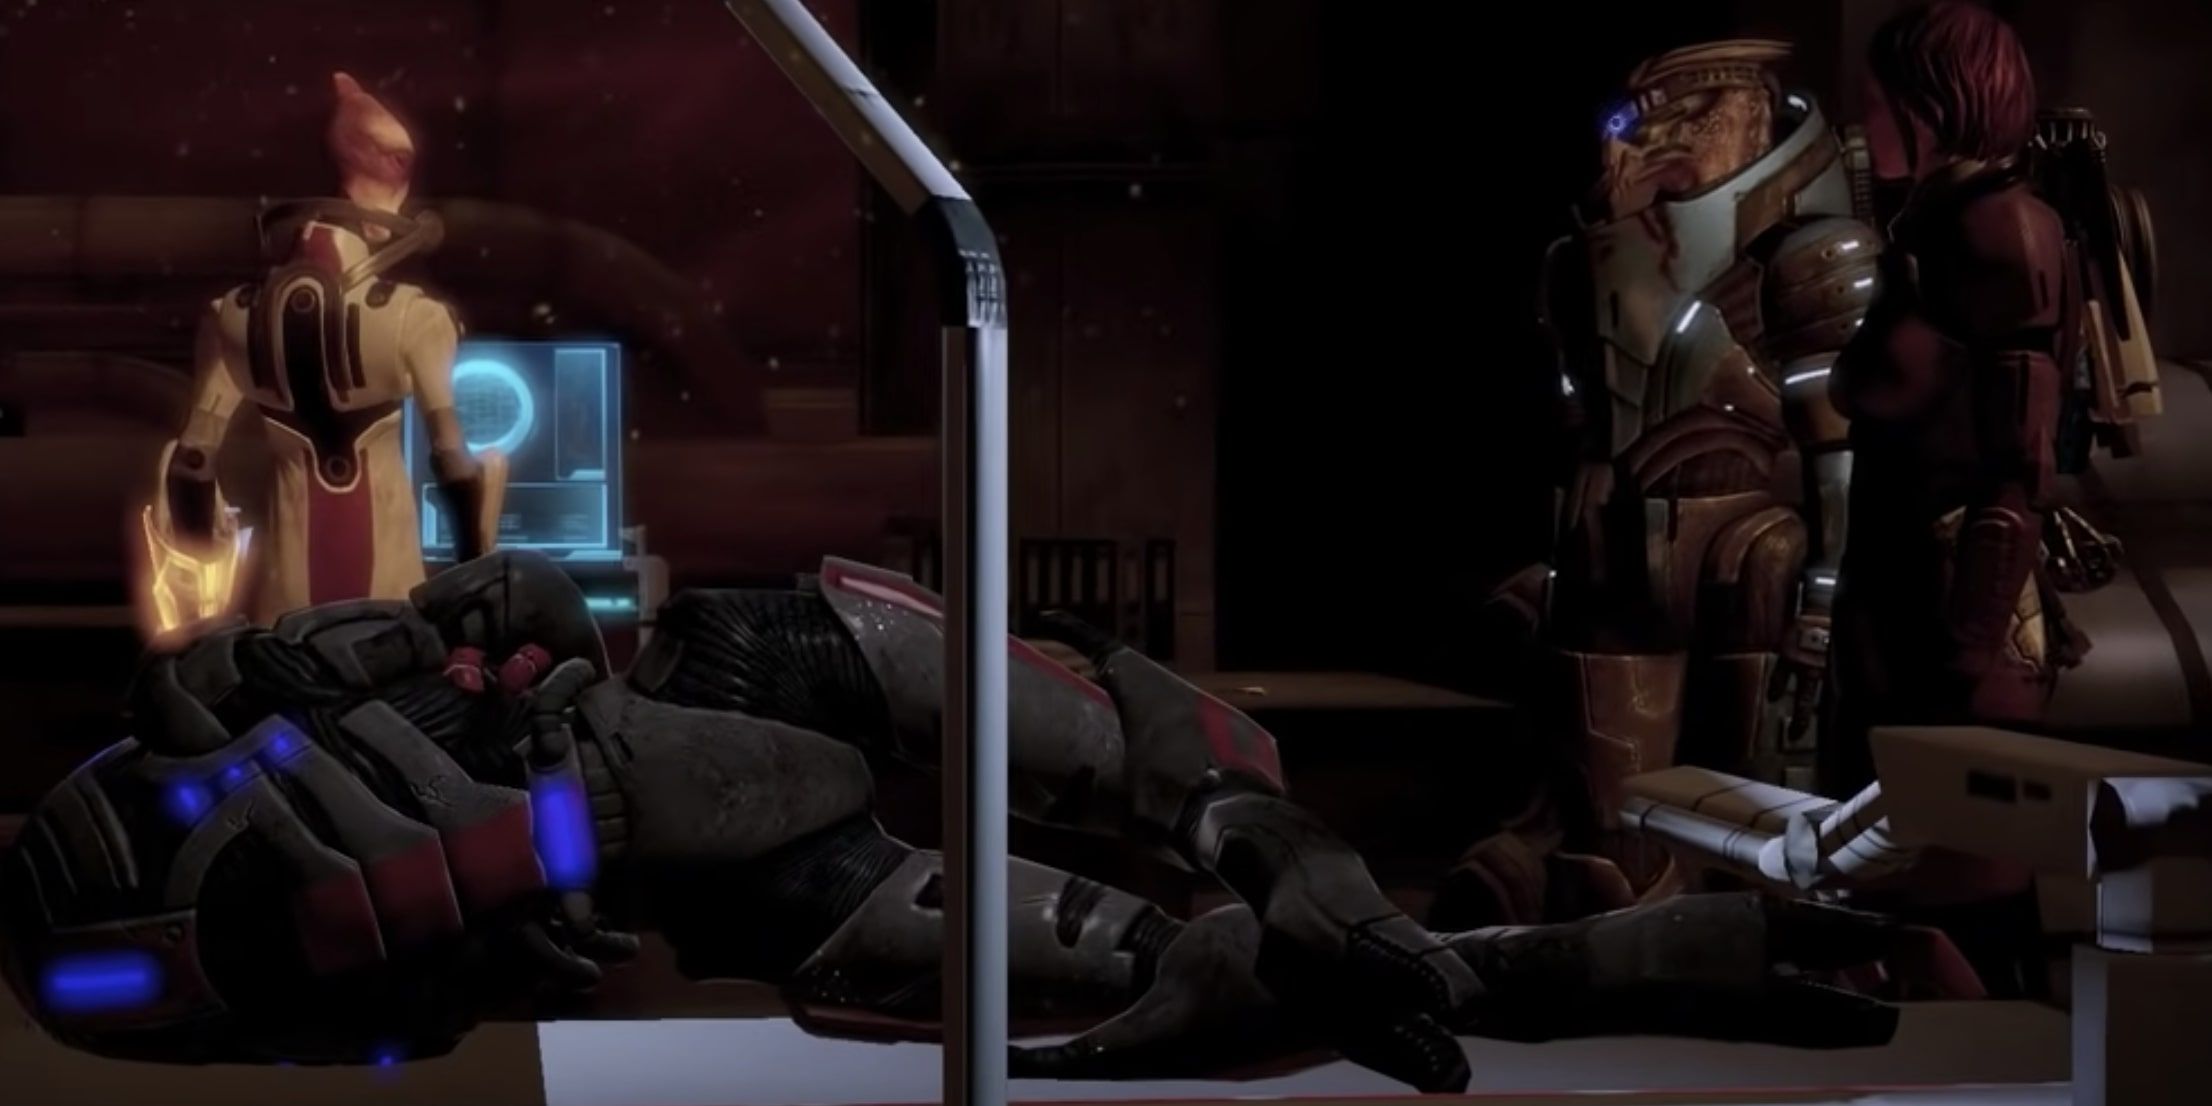 Mass Effect 2 Garrus and Mordin Meeting During Mordin's Recruitment Mission